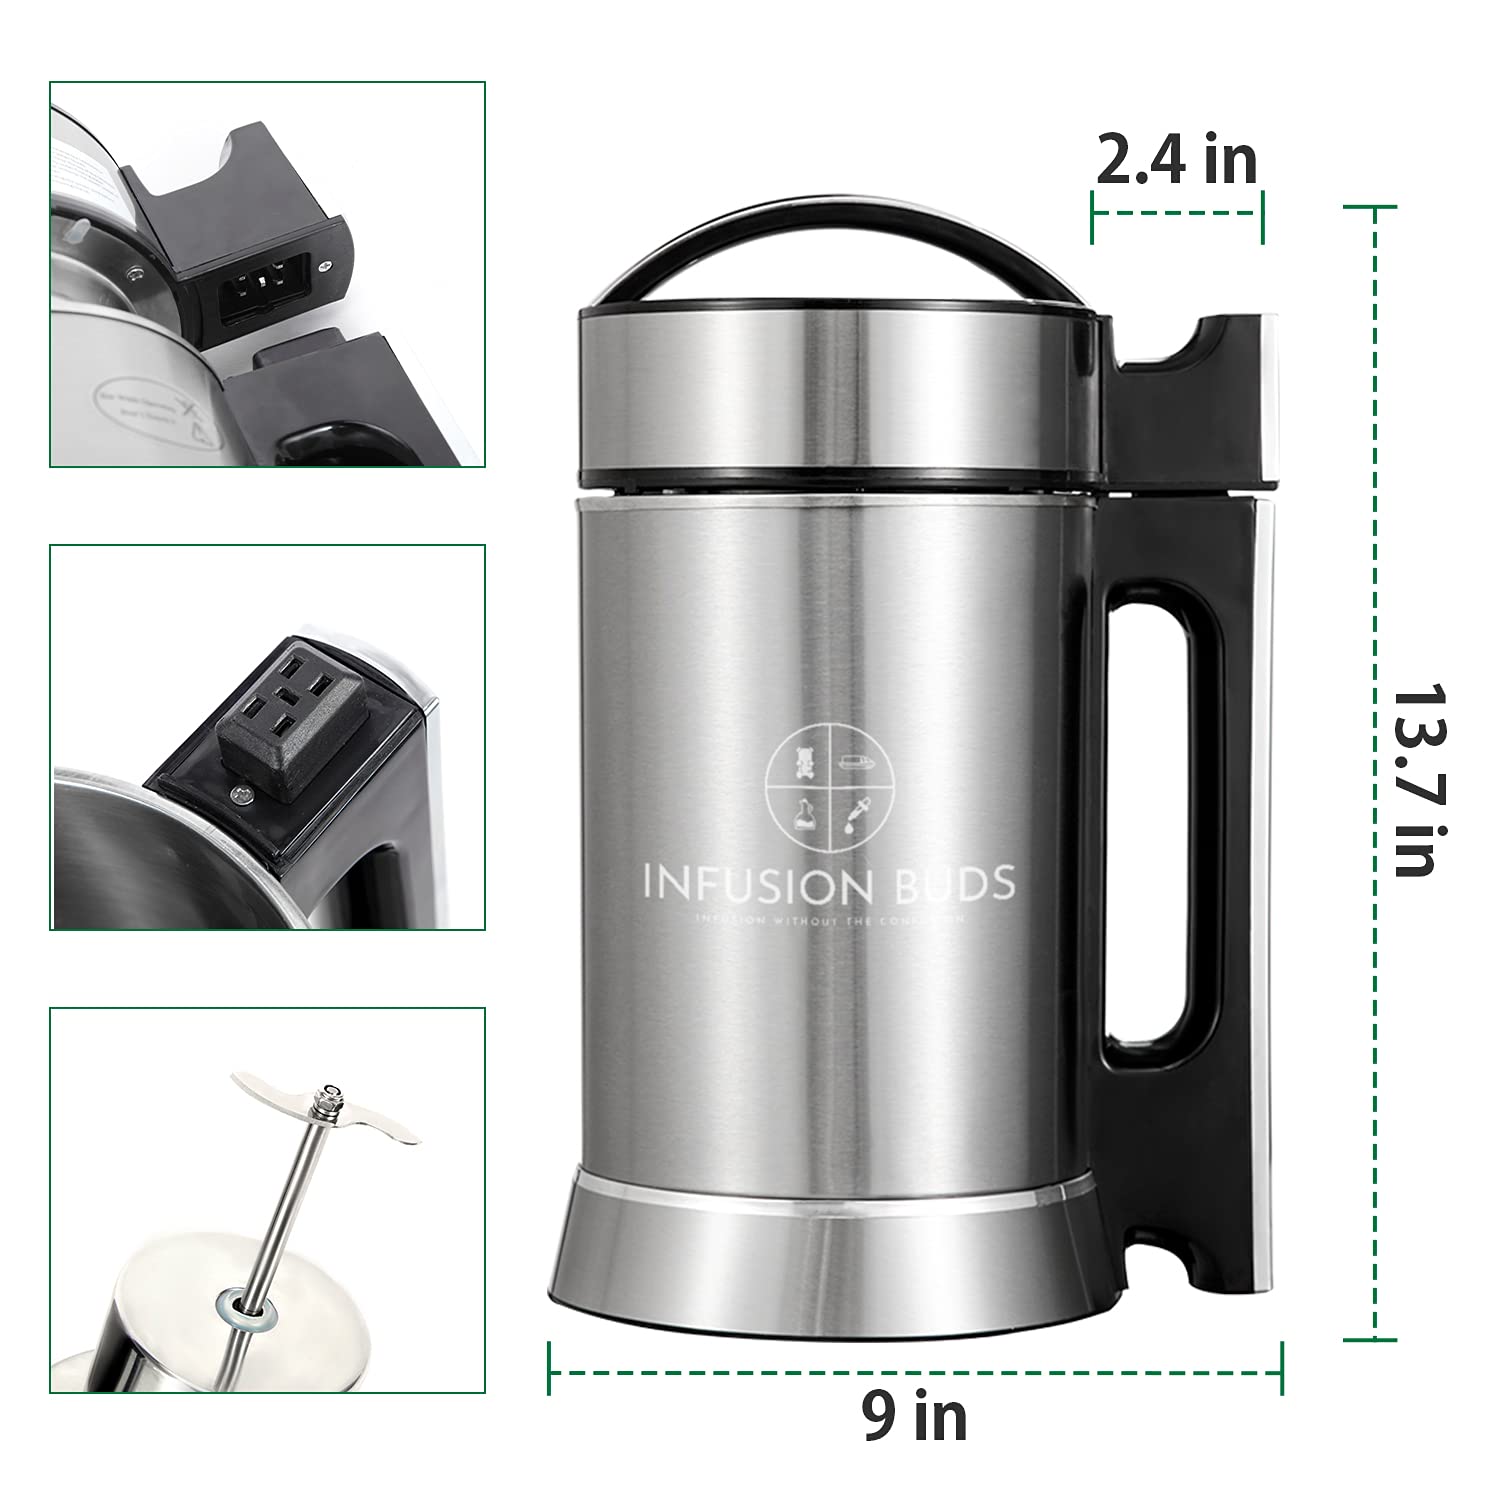 Infusion Buds Butter Infuser Machine- Herbal Butter Maker Machine | Magic Herbal Butter & Oil Infuser Machine. Butter Machine | Includes Decarb Box and Tons of Accessories